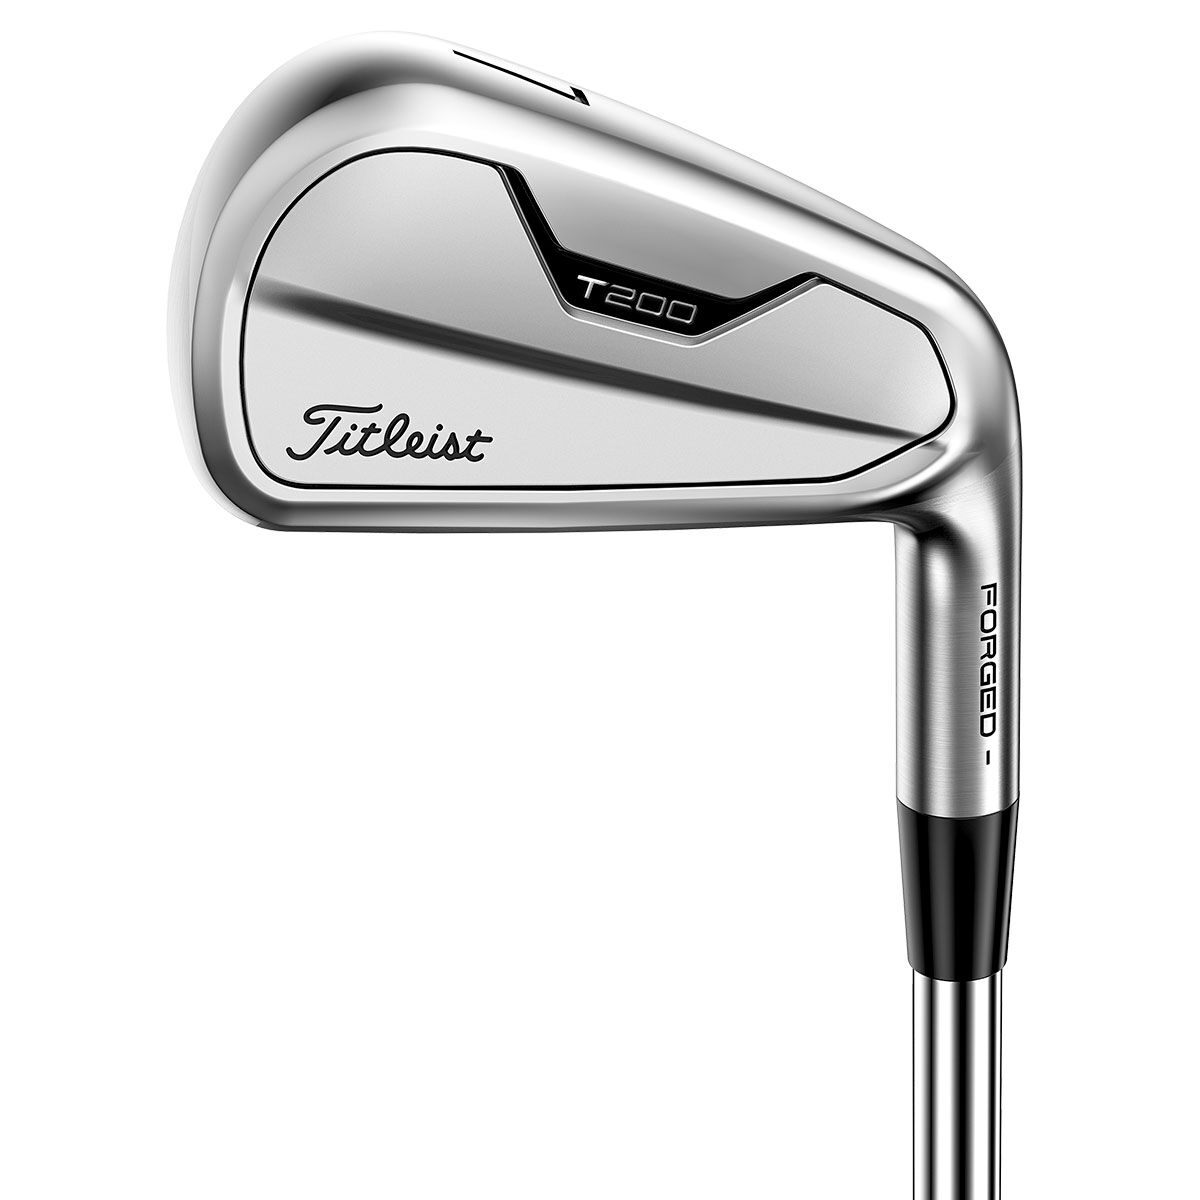 Titleist Silver and Black Printed T200 Steel Golf Irons 2021, Mens, 5-Gw (7 Irons), Left Hand, Steel | American Golf, Size: Stiff